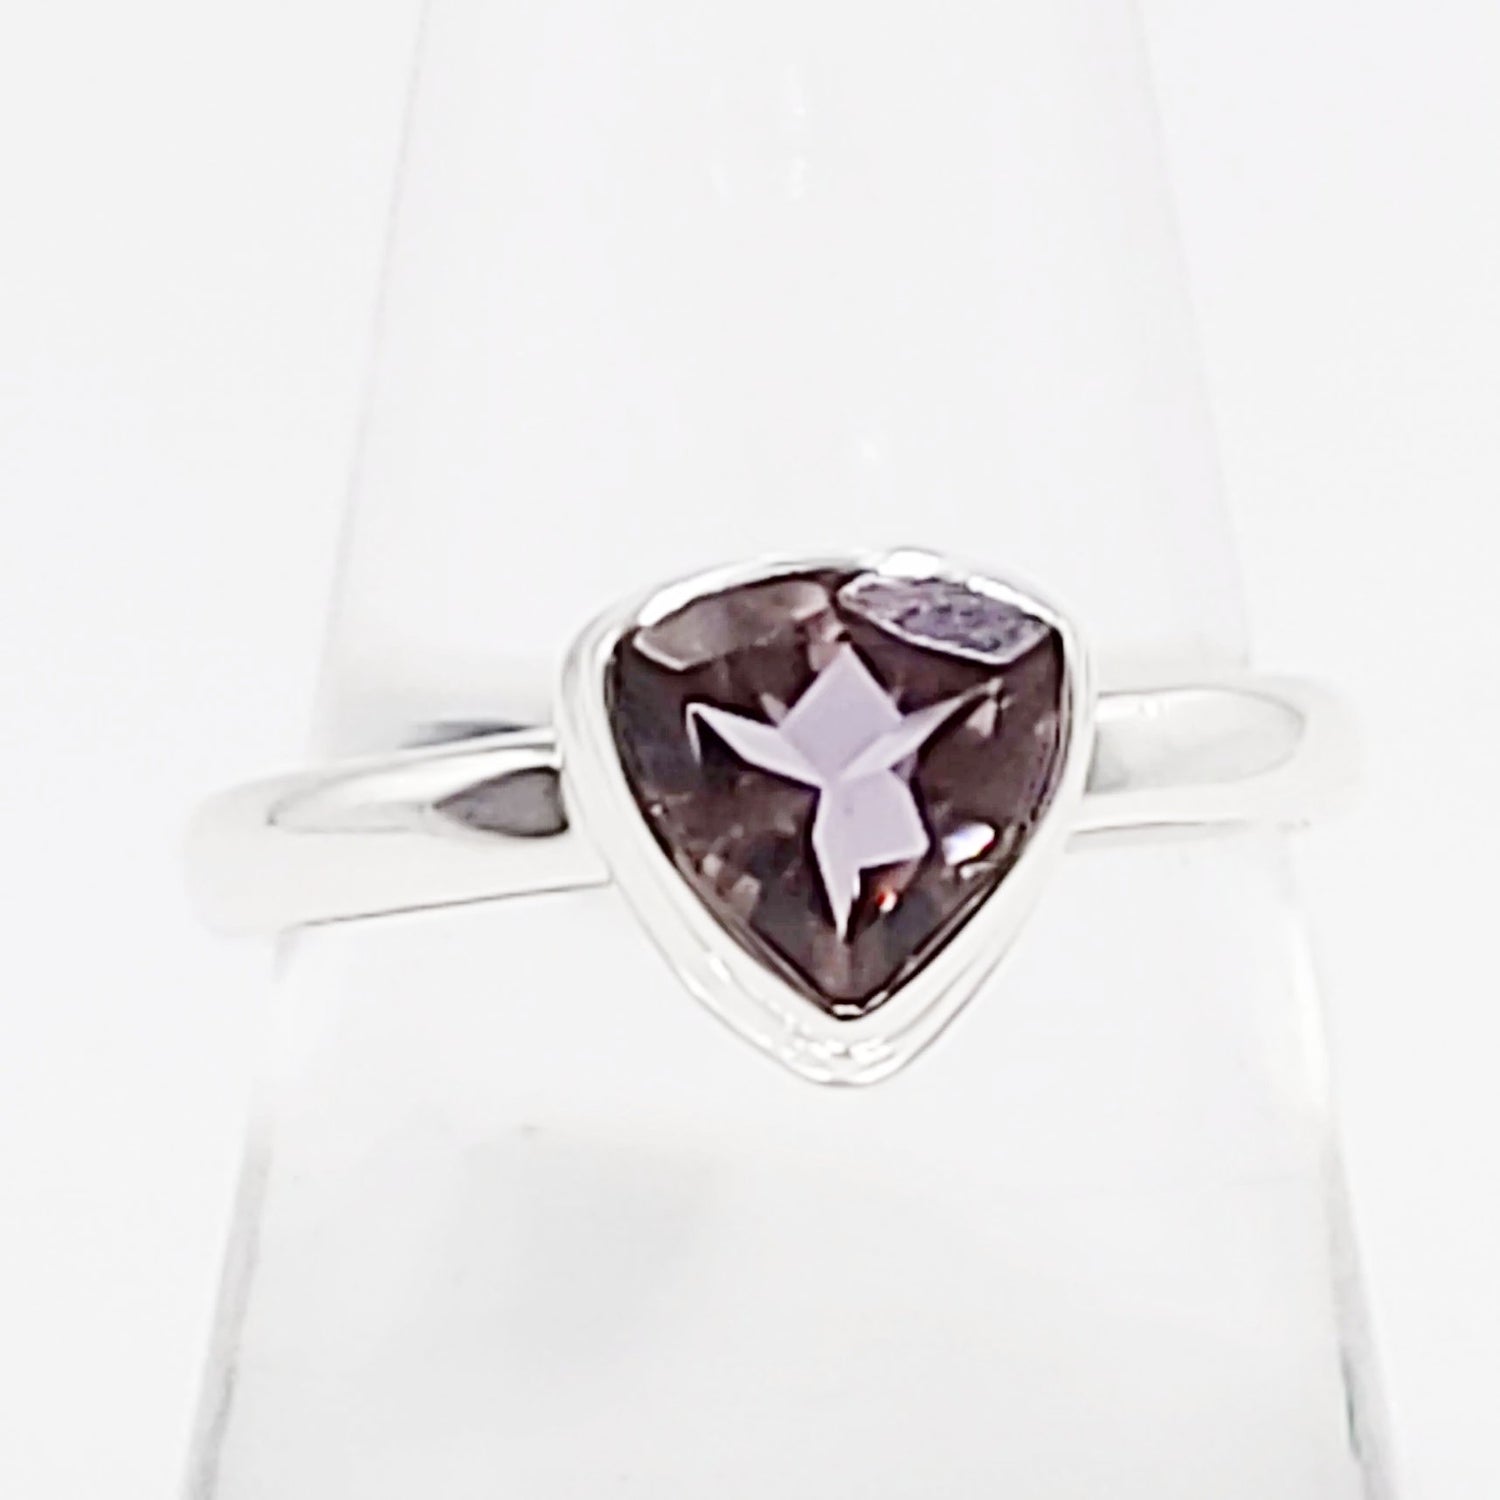 "Lavender" Alexandrite Trillion Ring Sterling Silver Size 7 - Elevated Metaphysical